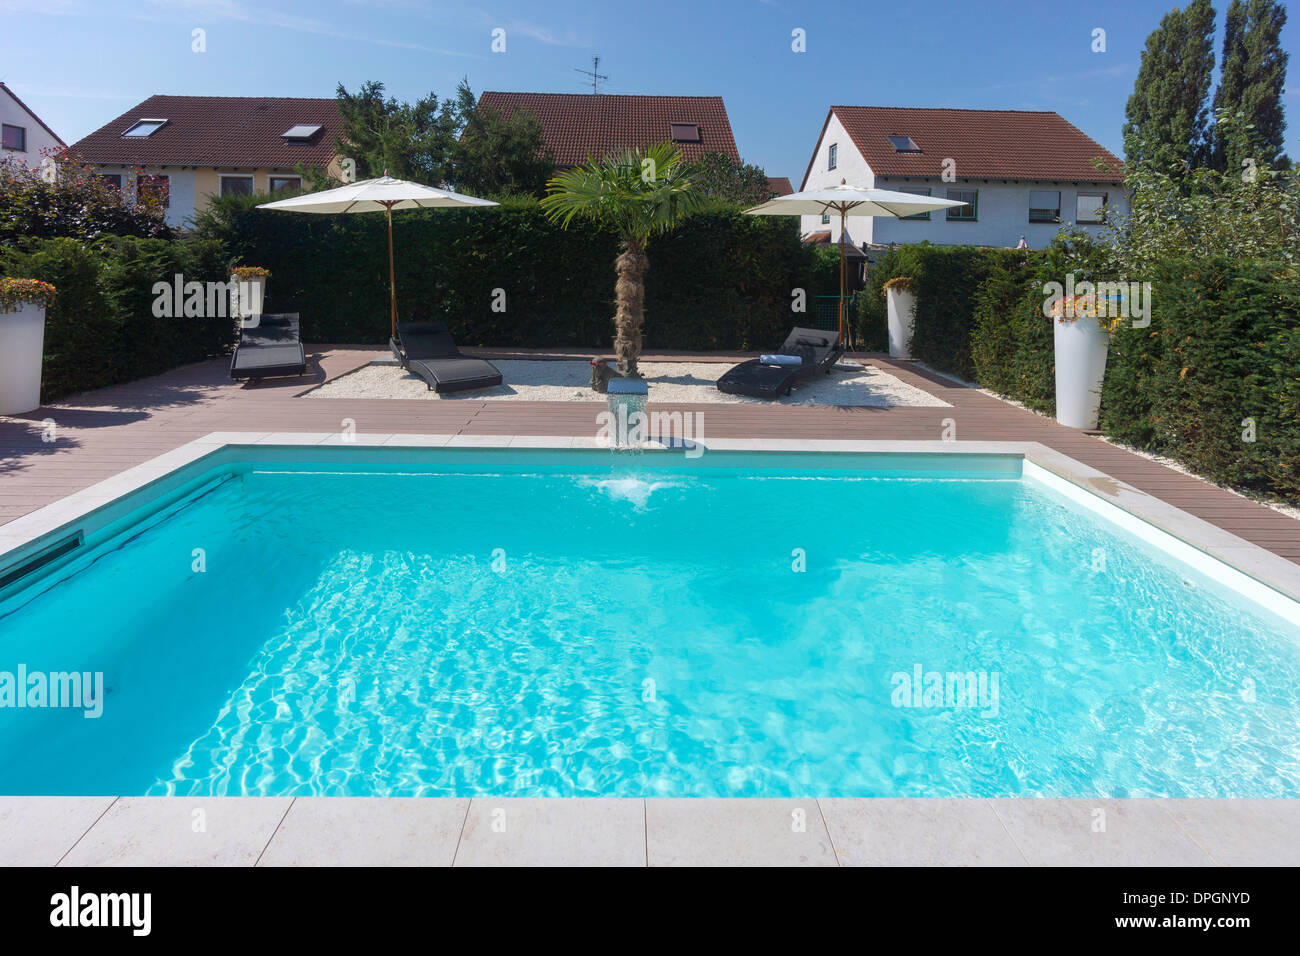 Private garden with pool and terrace in summer, Germany, Europe - August 2013 Stock Photo